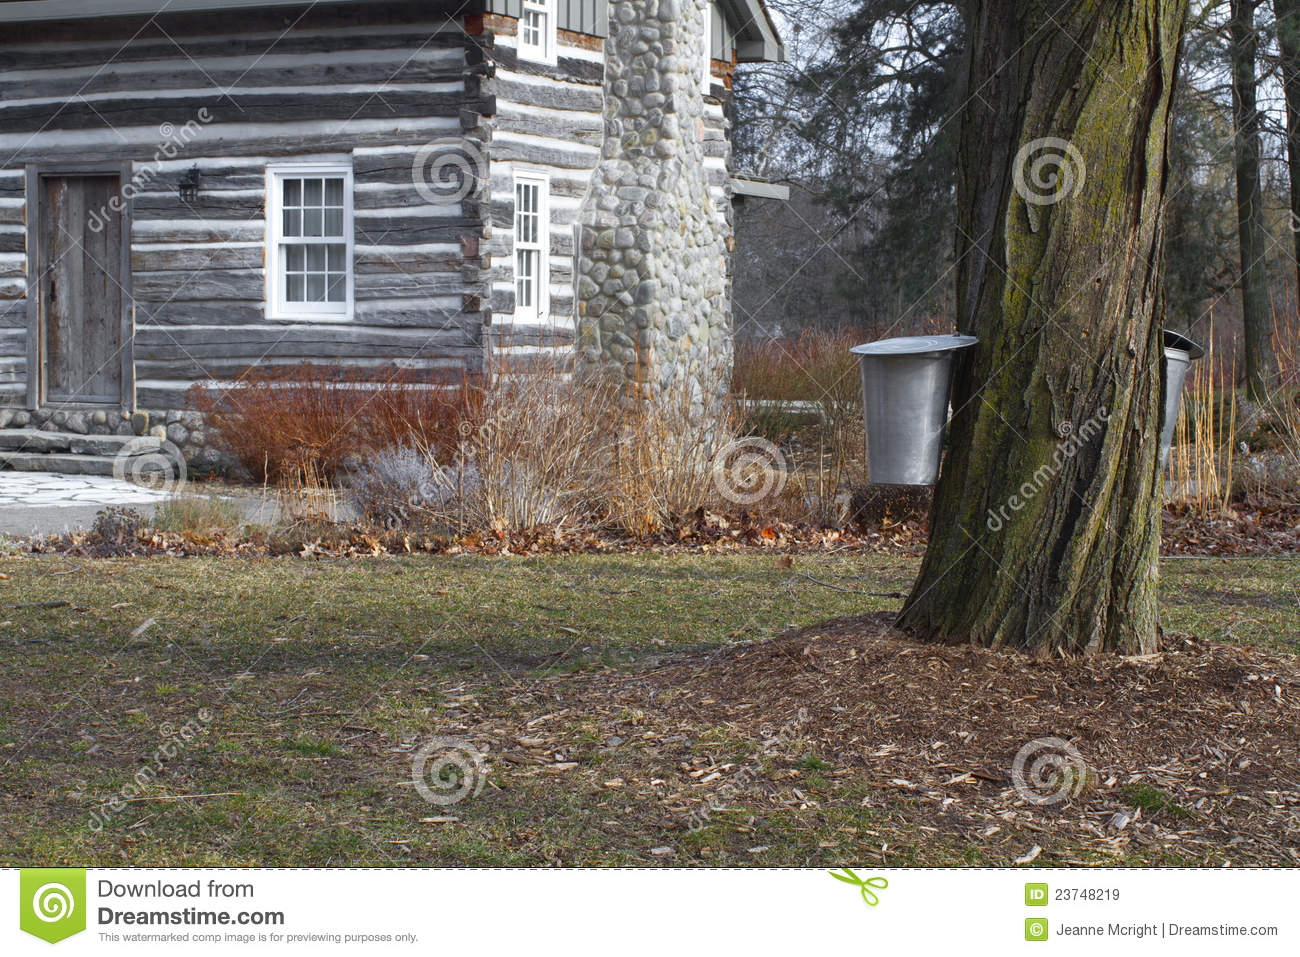 Maple Tree With Sap Buckets And Log Cabin Royalty Free Stock Images